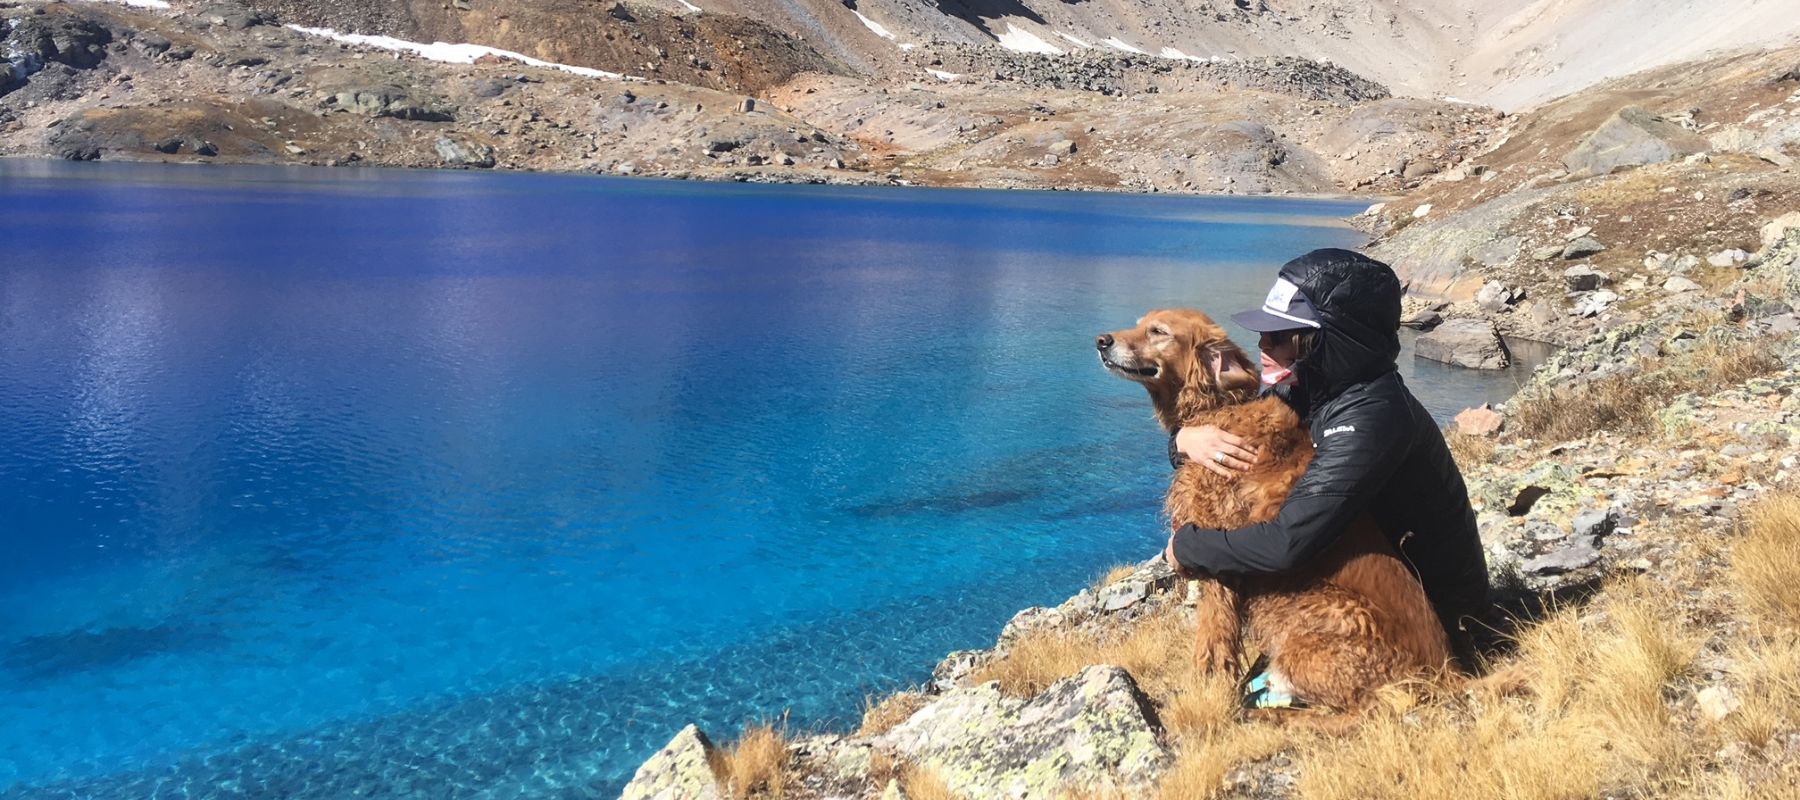 Dog and its owner overlooking lake in Colorado